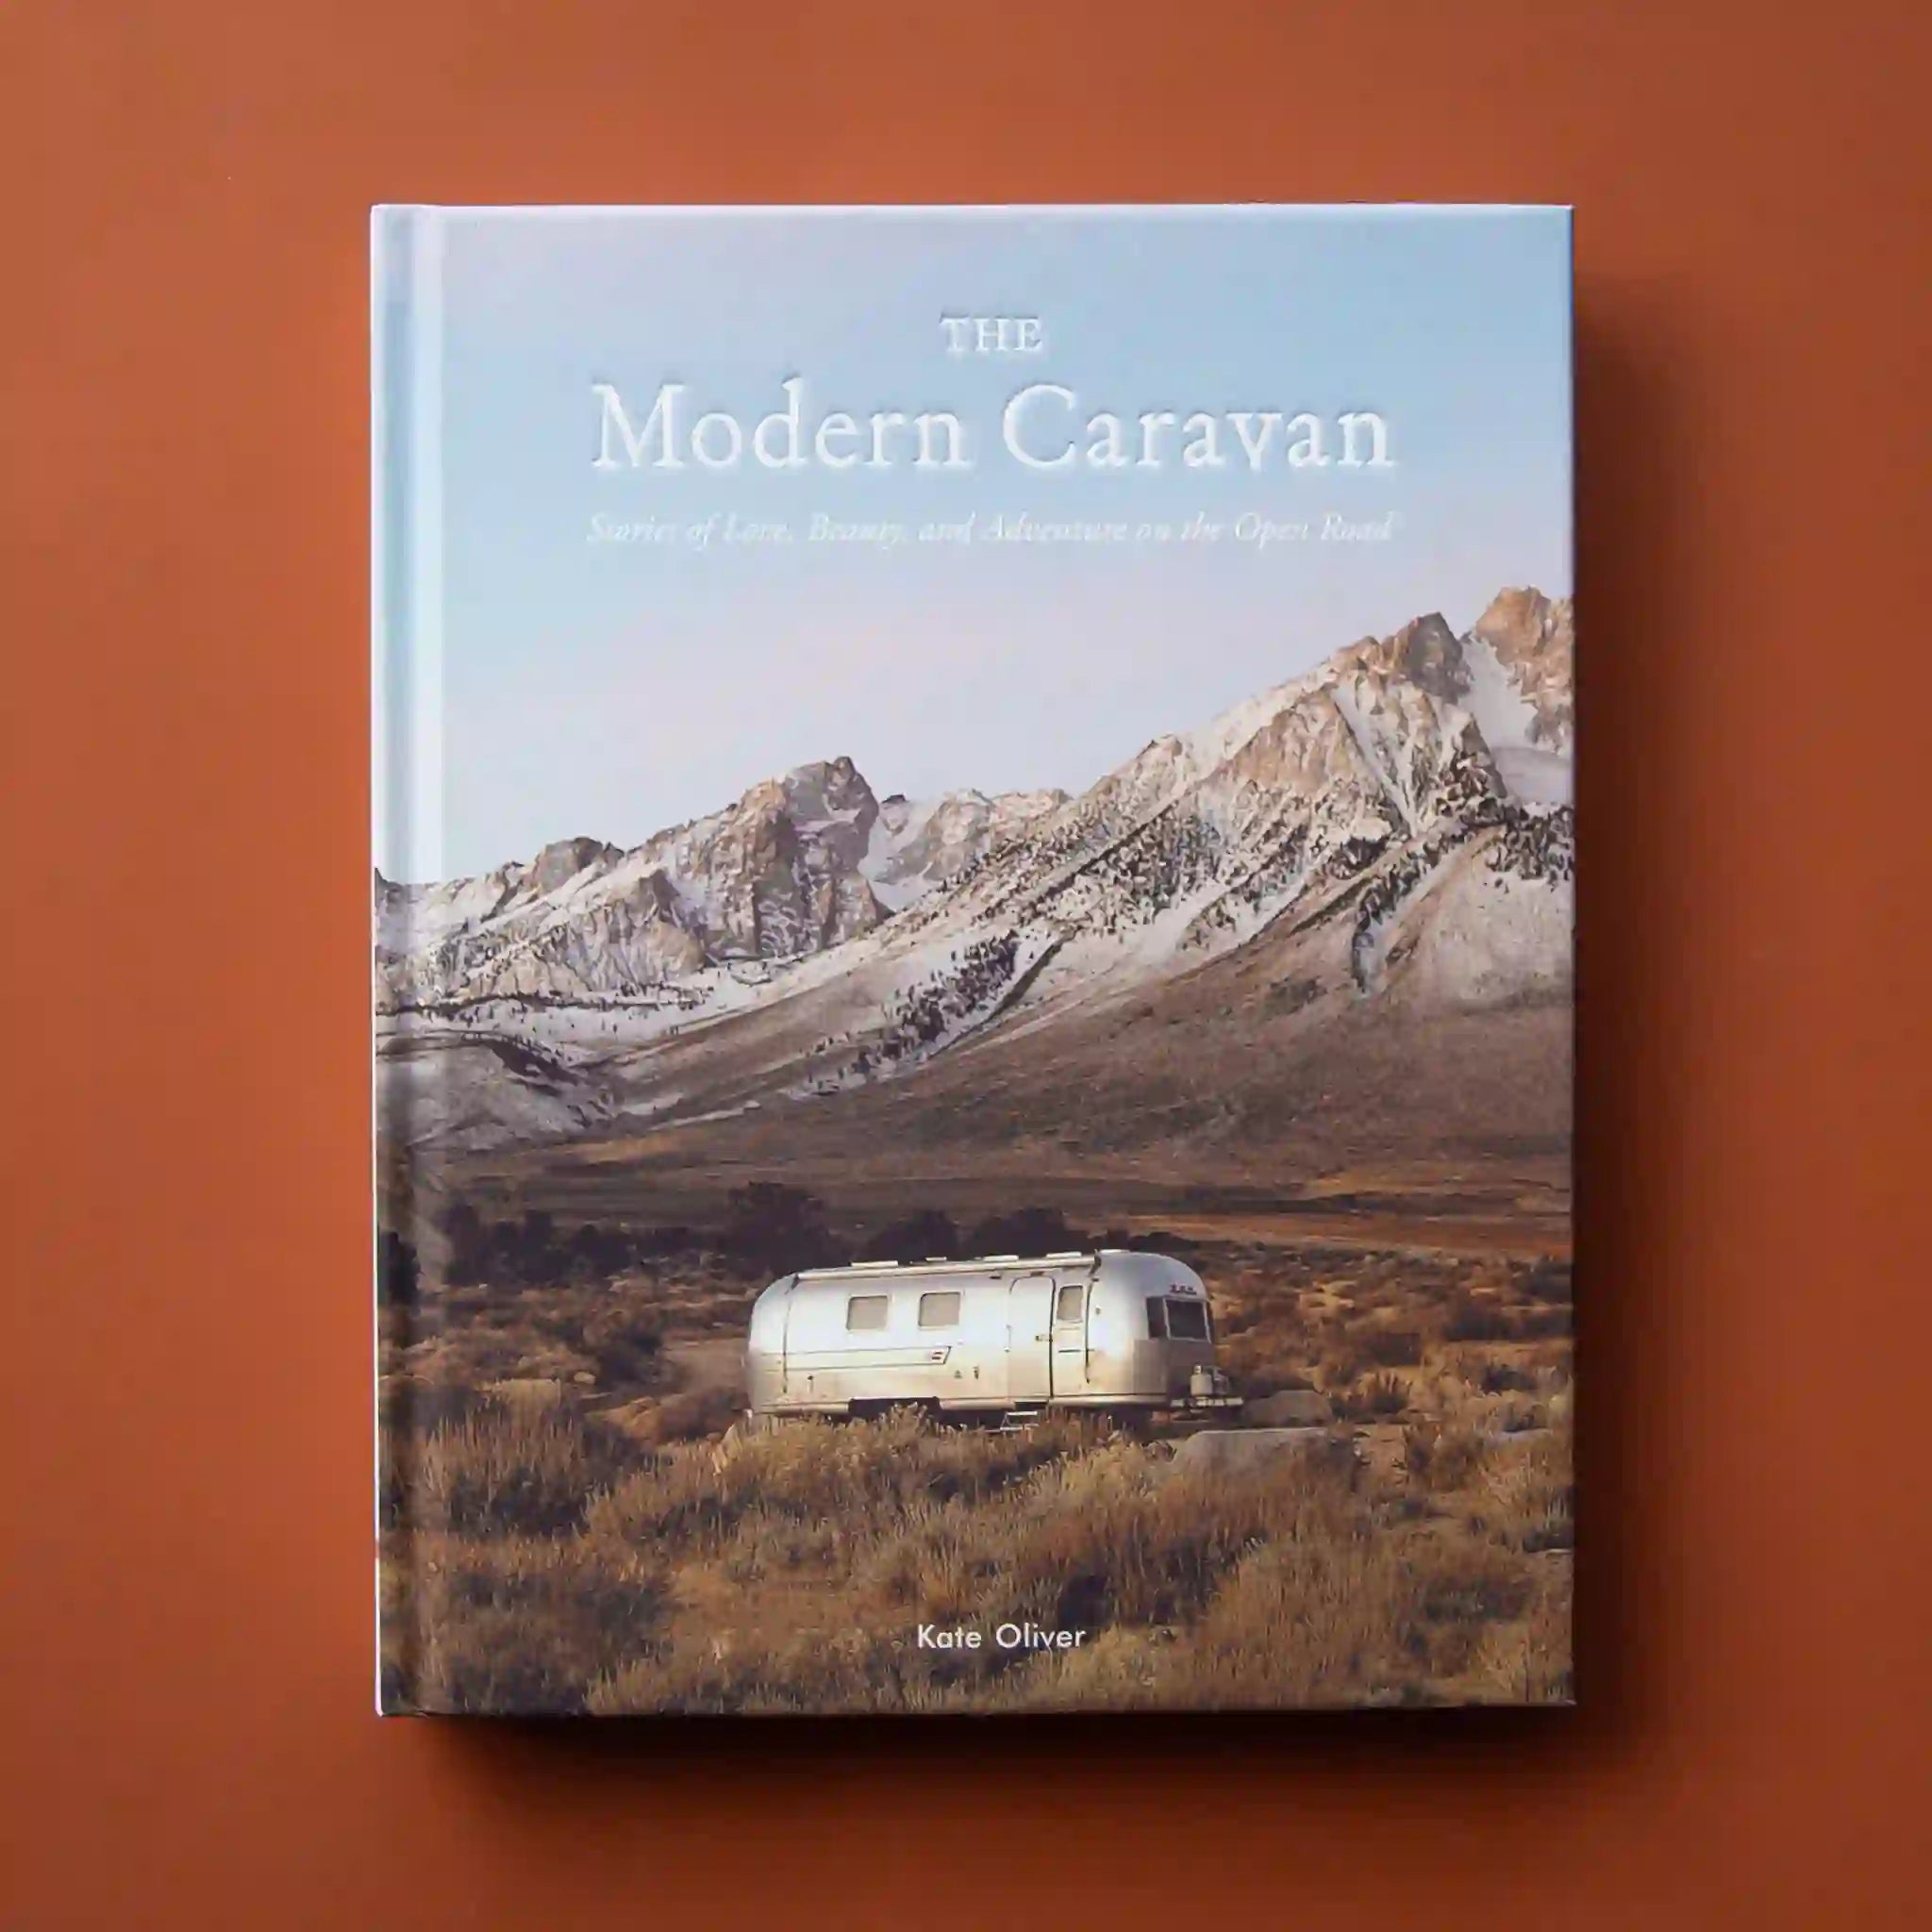 Hard cover of travel book titled &#39;The Modern Caravan, stories of love, beauty, and adventure on the open road&#39; in white pressed lettering. Behind the title is a cool toned mountain scene. Below the mountains sits a silver airstream trailer amidst an open valley.